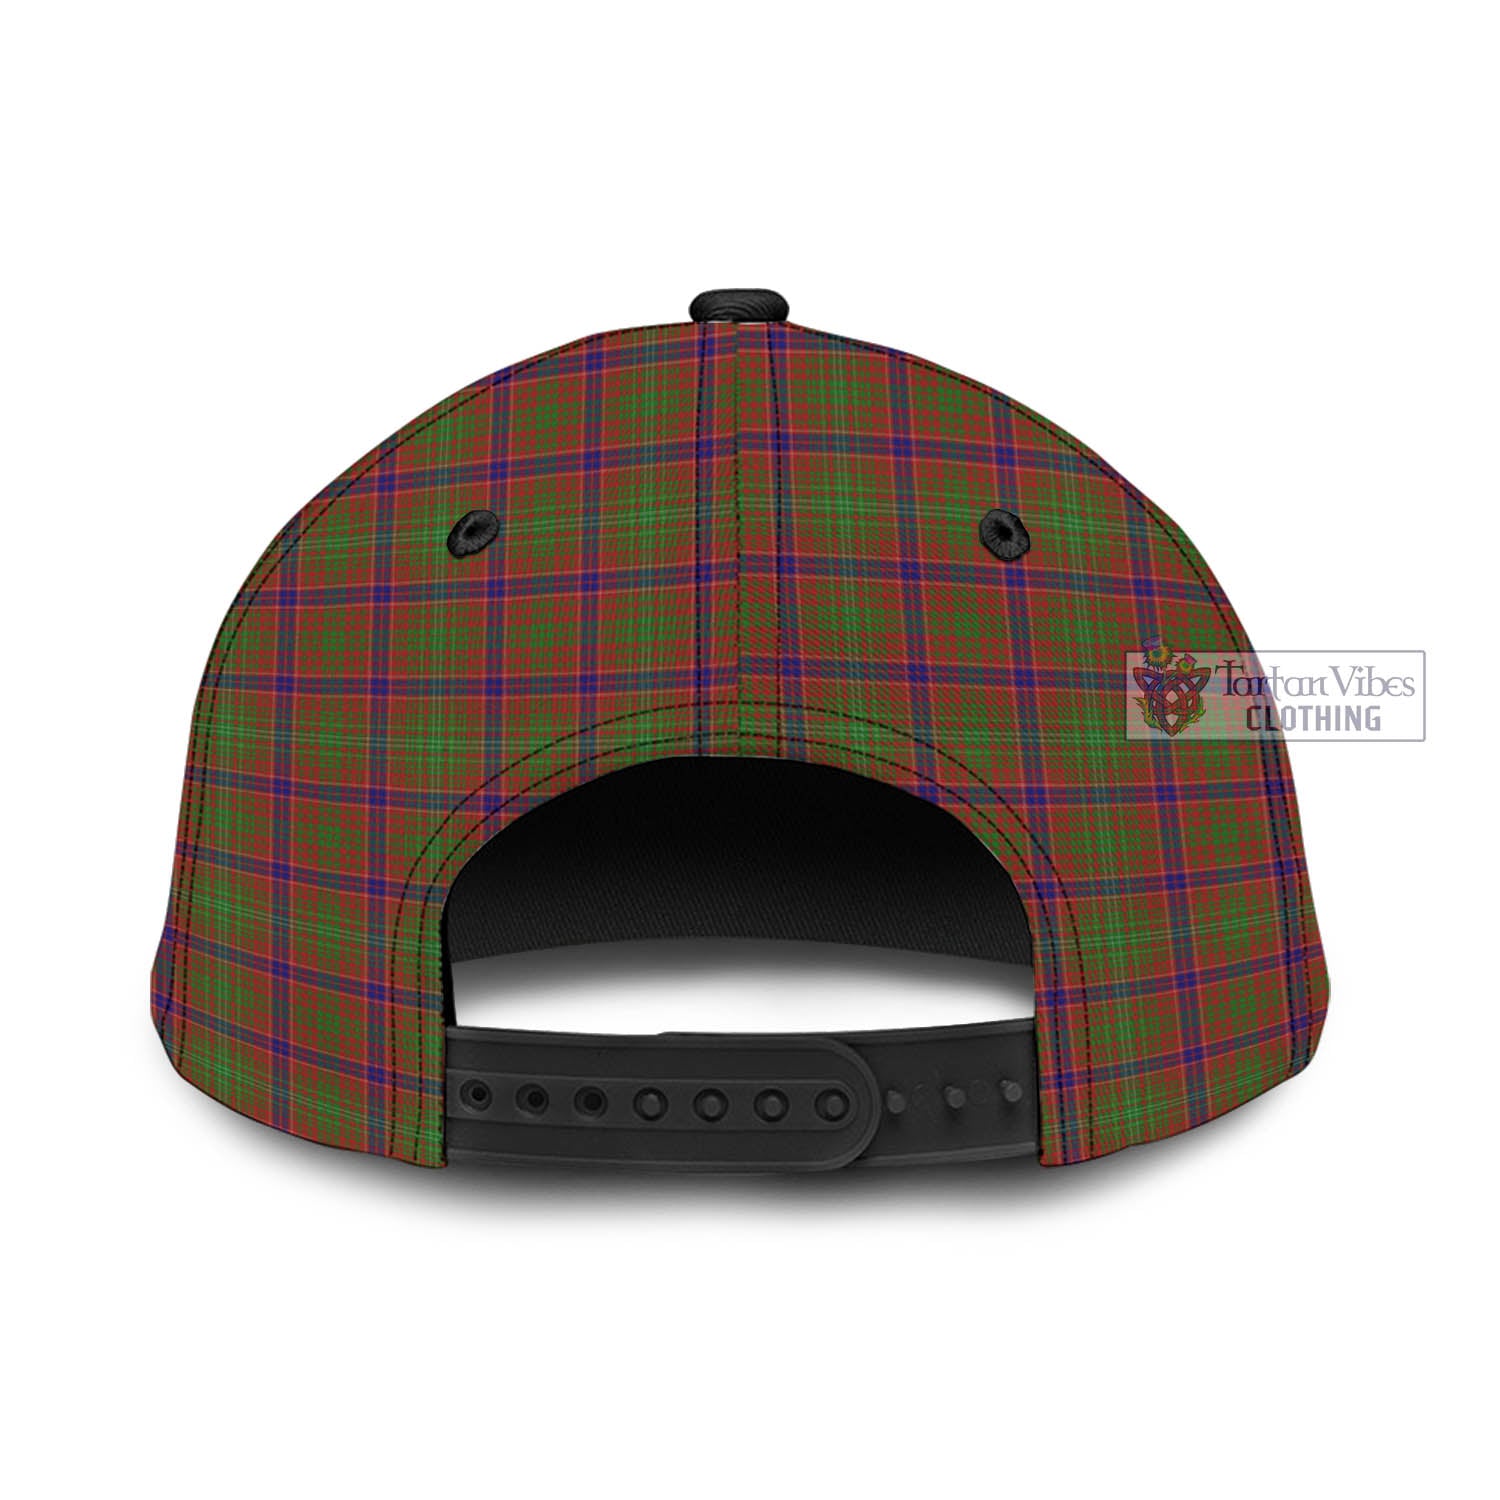 Tartan Vibes Clothing Lumsden Tartan Classic Cap with Family Crest In Me Style